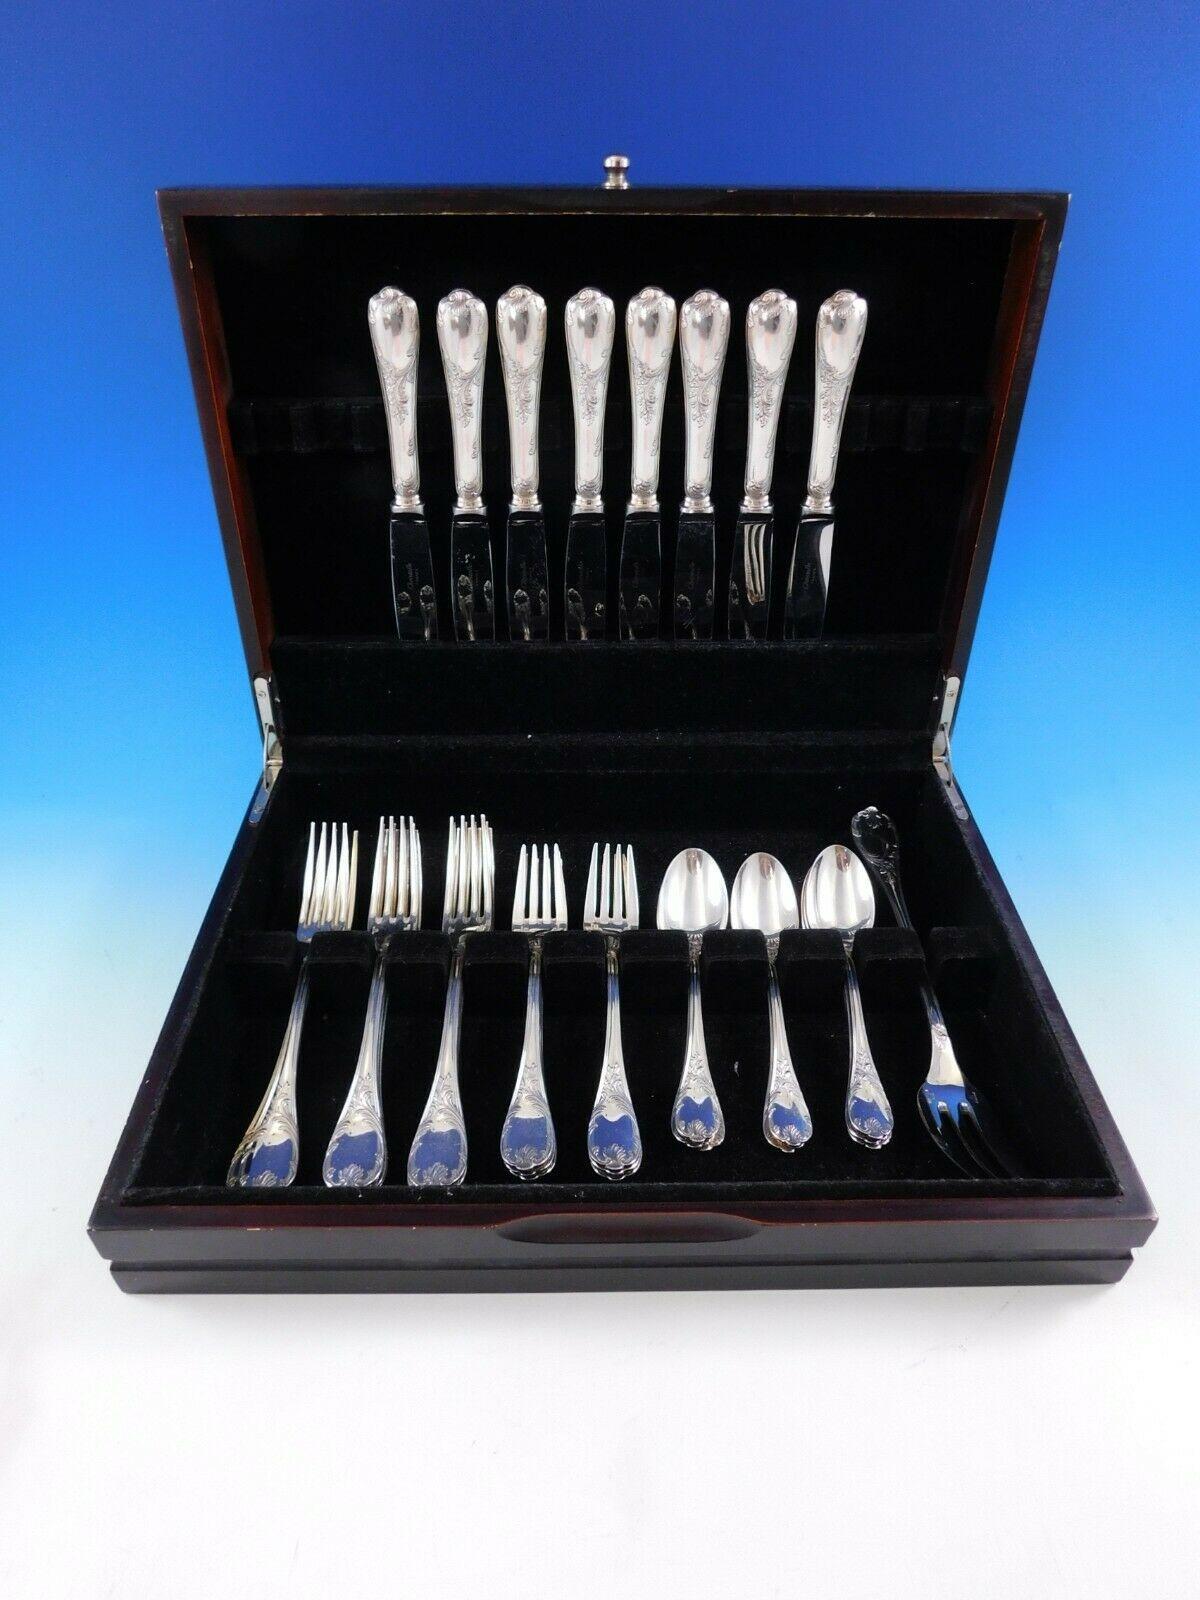 Marly by Christofle France silver plate flatware set, 33 pieces. This set includes:

8 regular knives, 9 1/4